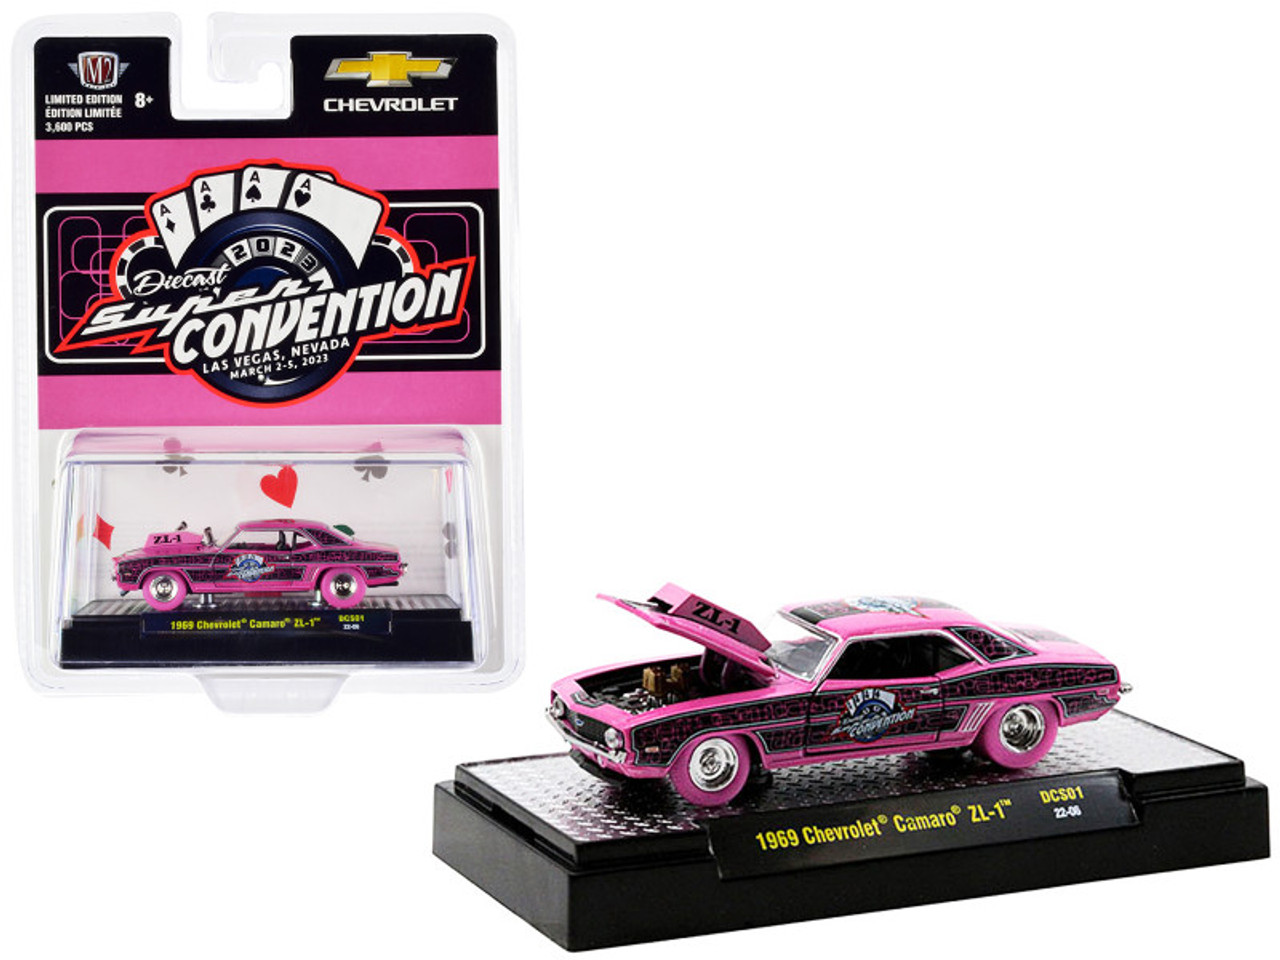 1969 Chevrolet Camaro ZL-1 Pink with Graphics "Diecast Super Convention" (2023) Exclusive Limited Edition to 3600 Pieces Worldwide 1/64 Diecast Model Car by M2 Machines